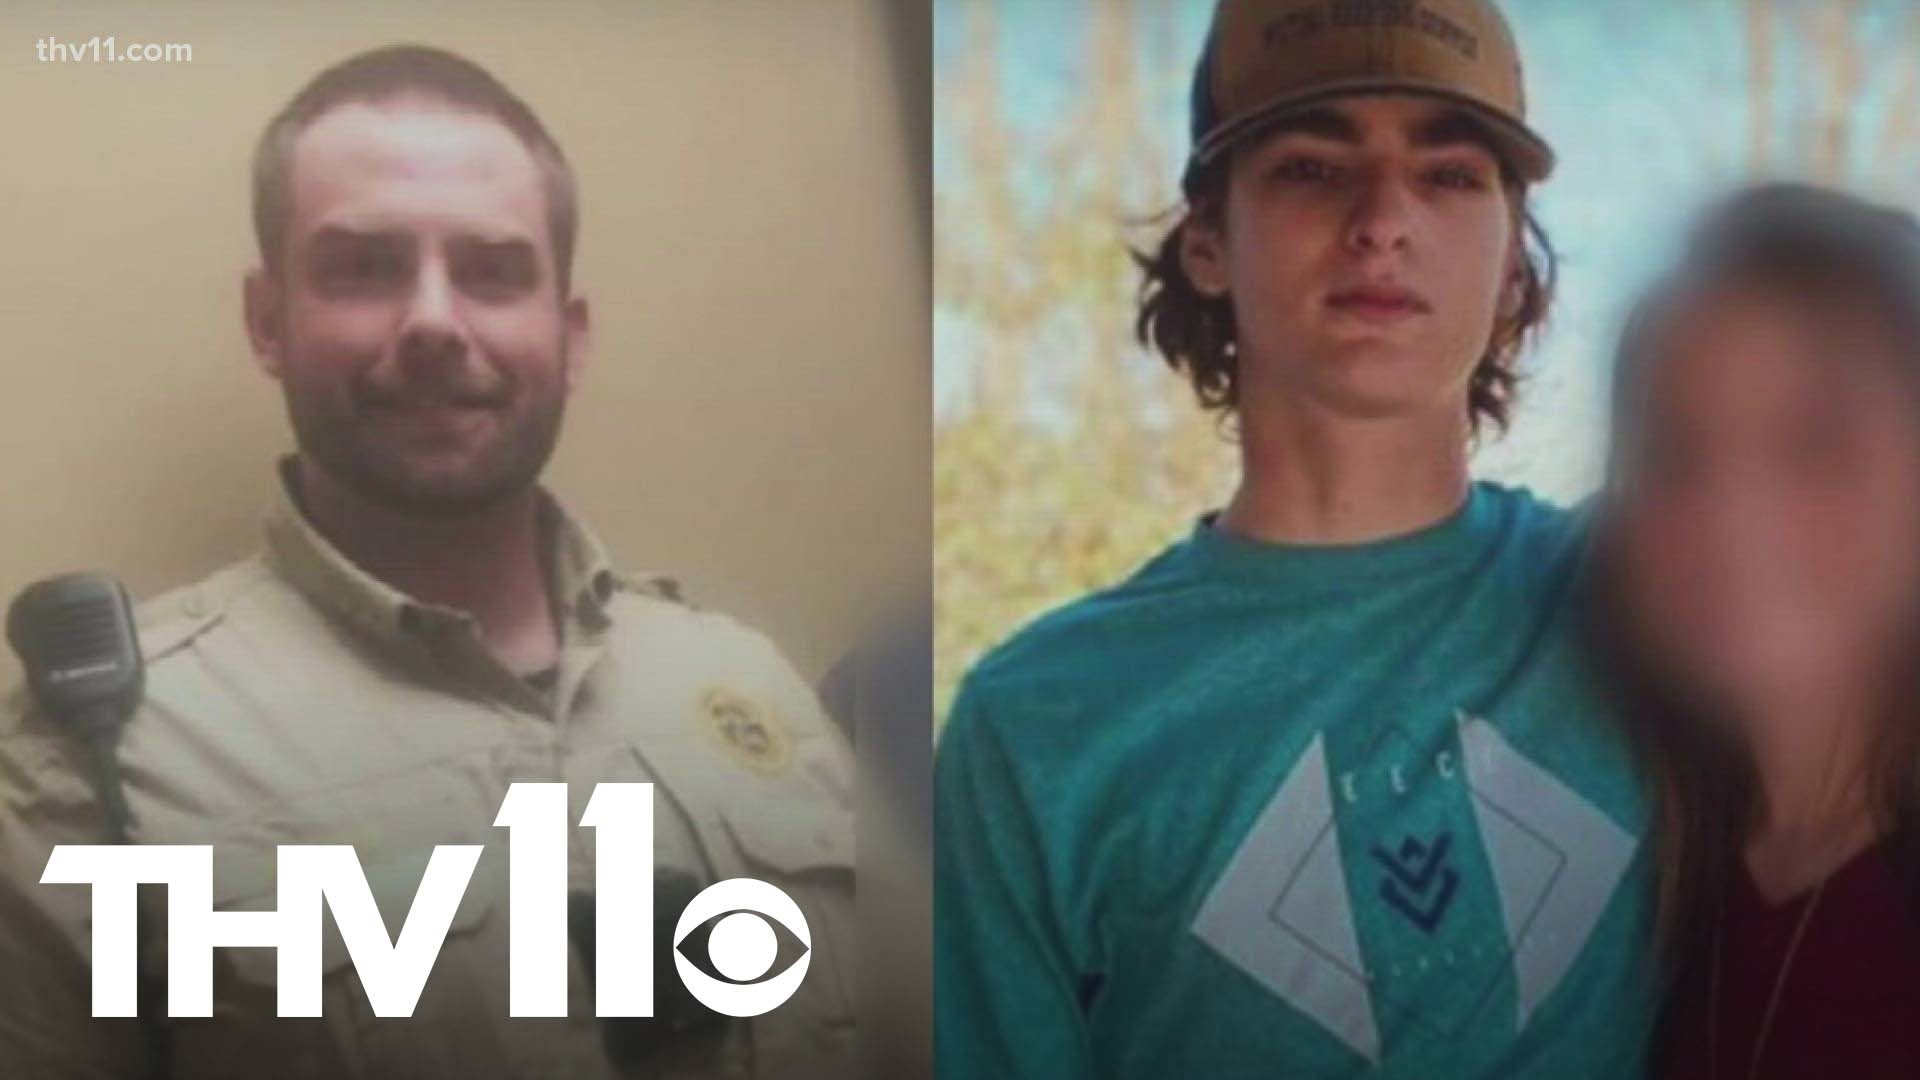 Hunter Brittain's family announced that they will be suing former deputy Michael Davis and Lonoke County Sheriff John Staley in connection to the fatal shooting.